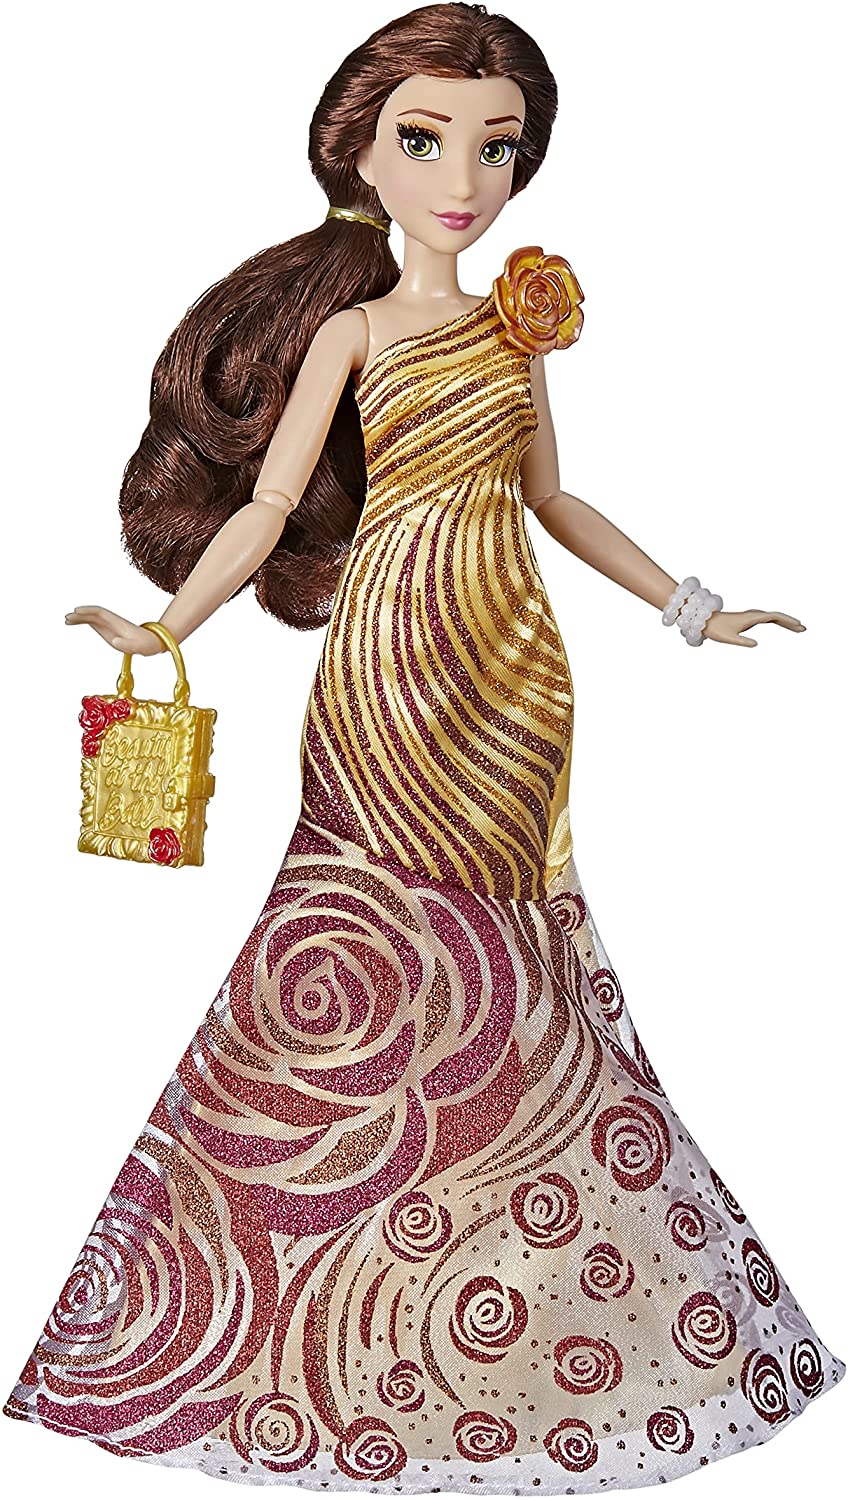 Disney Style Series Belle 30th Anniversary Doll 2021 by Hasbro